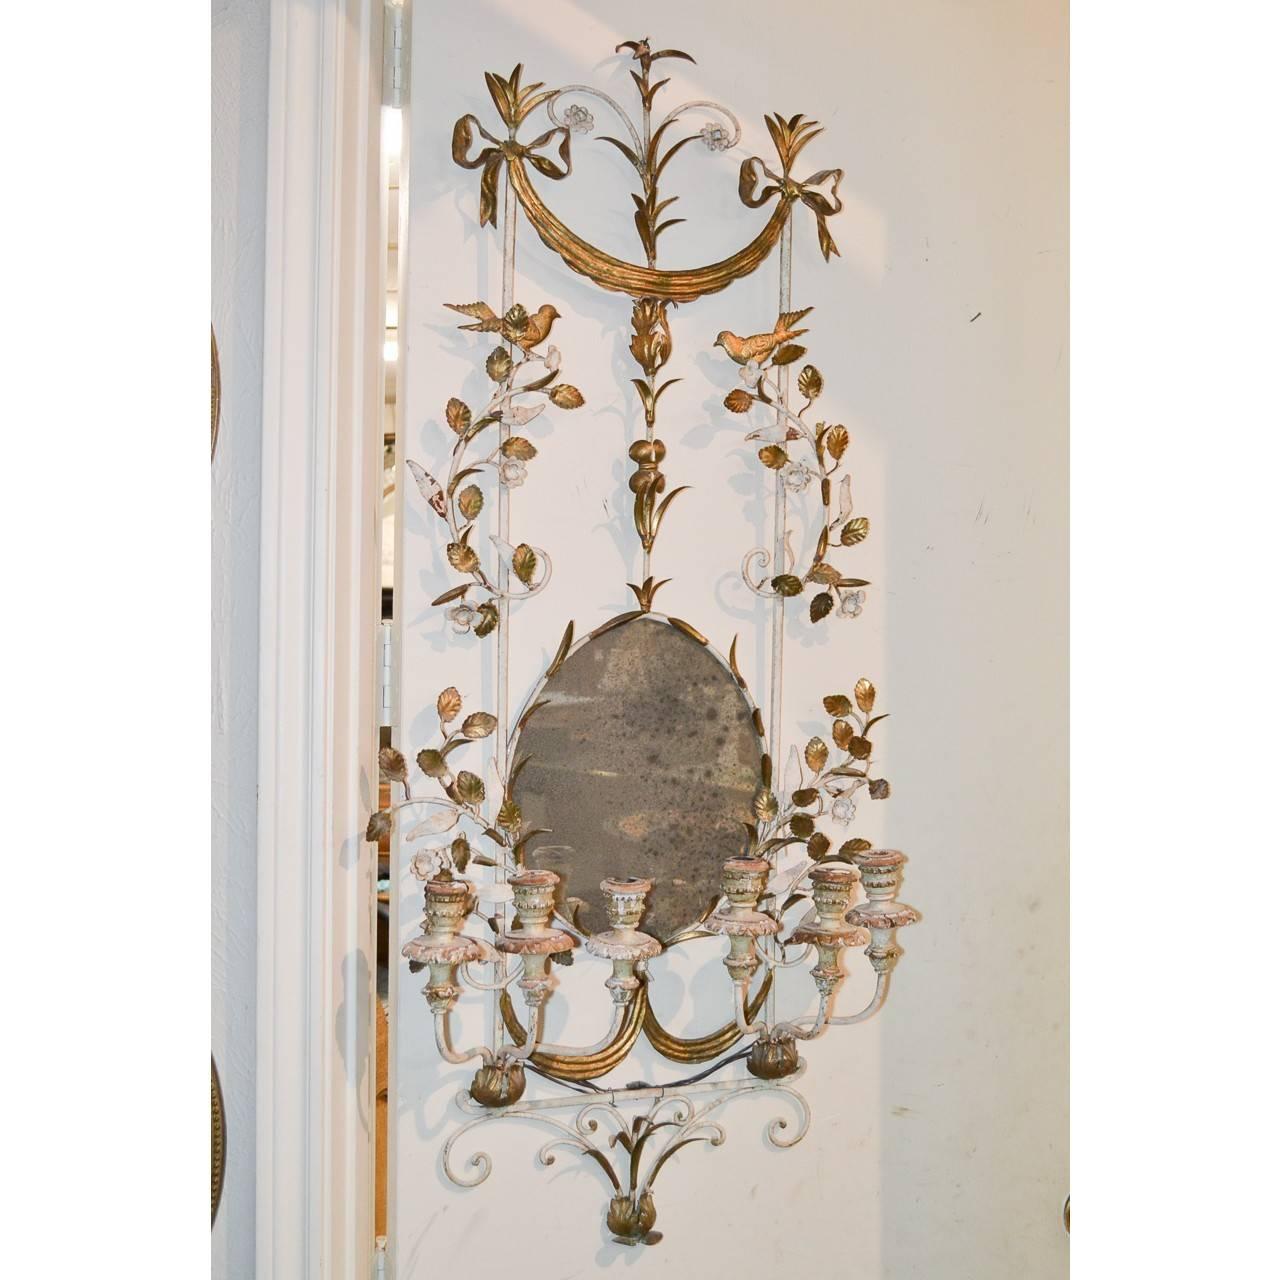 Romantic early 20th century metal wall sconce for six candles. Antique mirror centerpiece.
Collected in Paris, France. Exceptional.